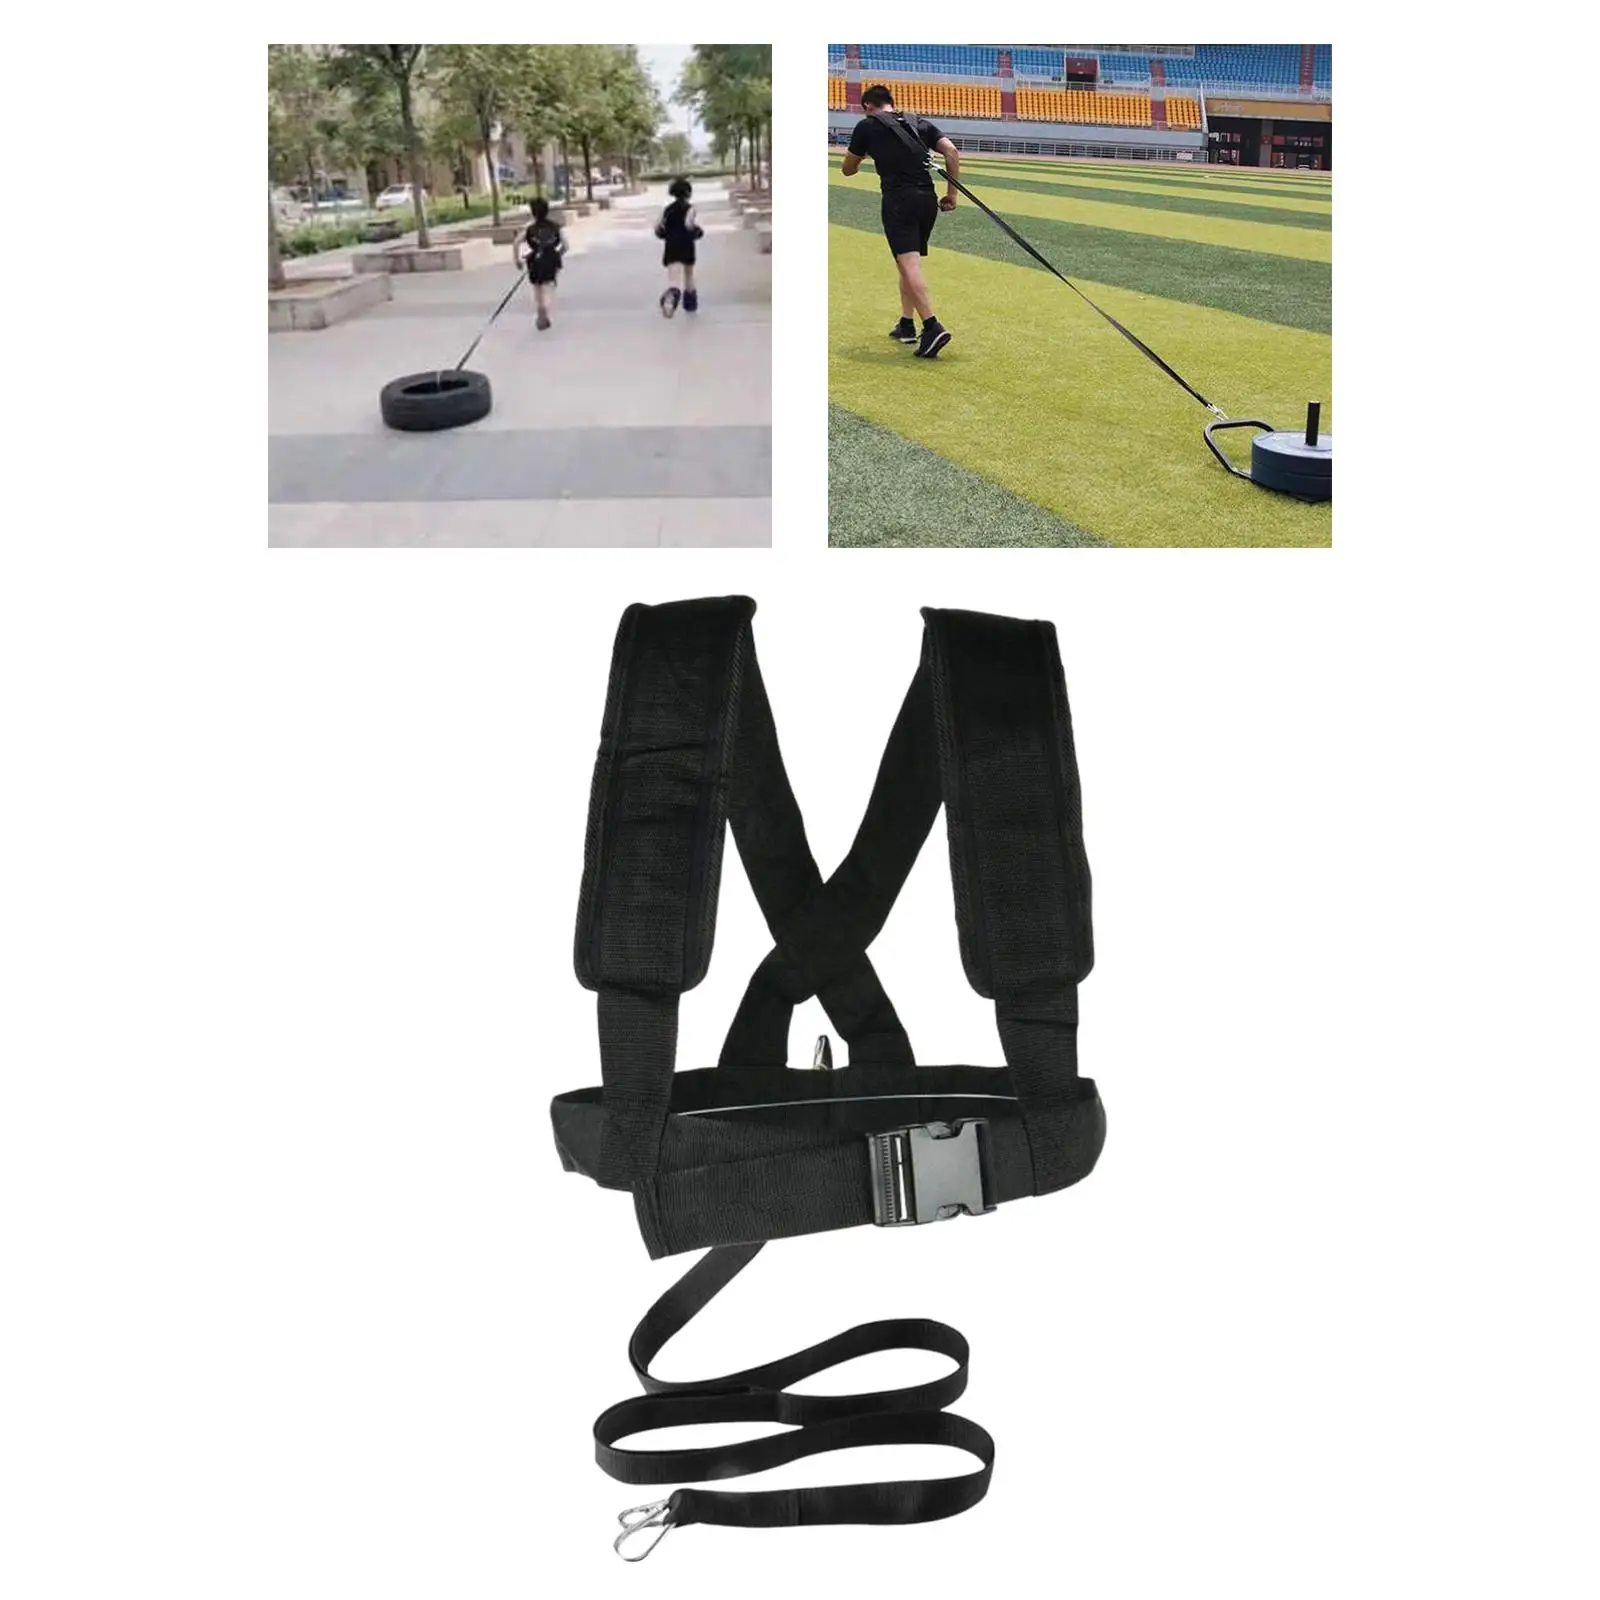 Sled Harness Tire Pulling Harness with Y Shape Strap Pull Strap Power Sled Workout Harness